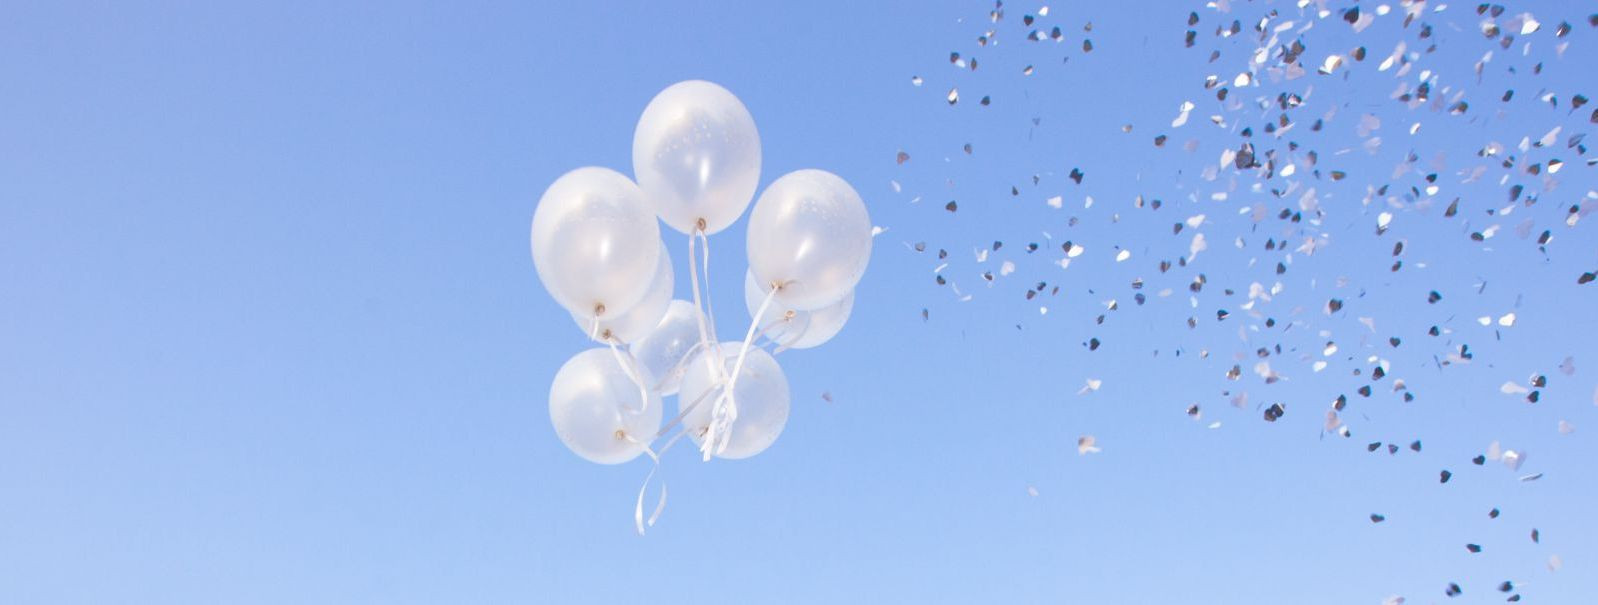 Wedding balloon decorations have evolved from simple party accessories to sophisticated design elements that can transform any venue. As we explore the latest t